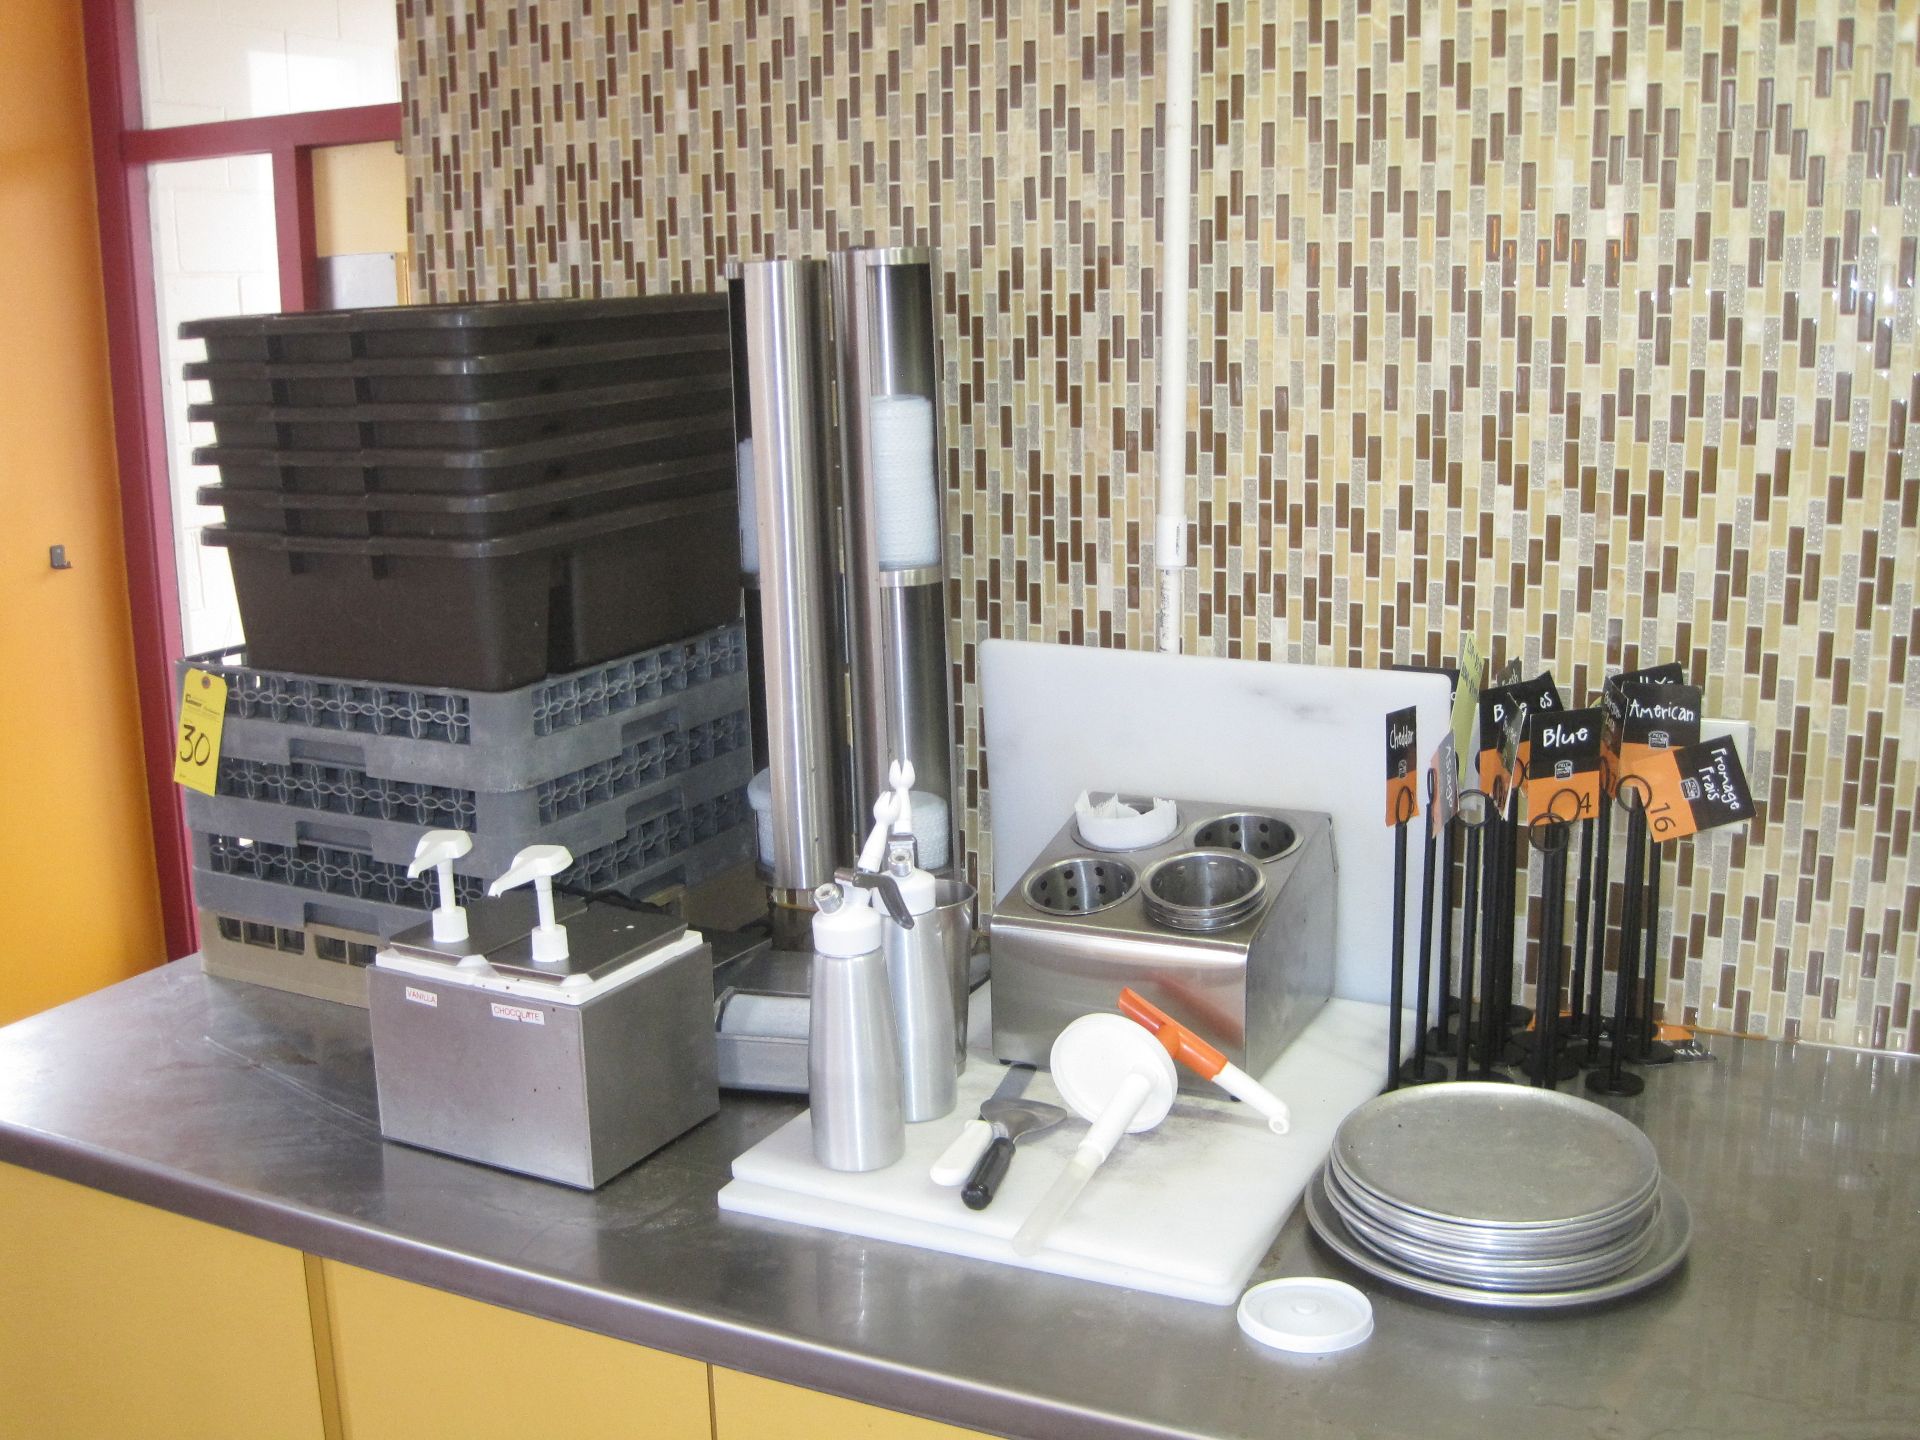 Kitchen Equipment Comprising of: Plastic Bins, S.S. Dispenser, Lid Holder, Cutting Boards, Whip